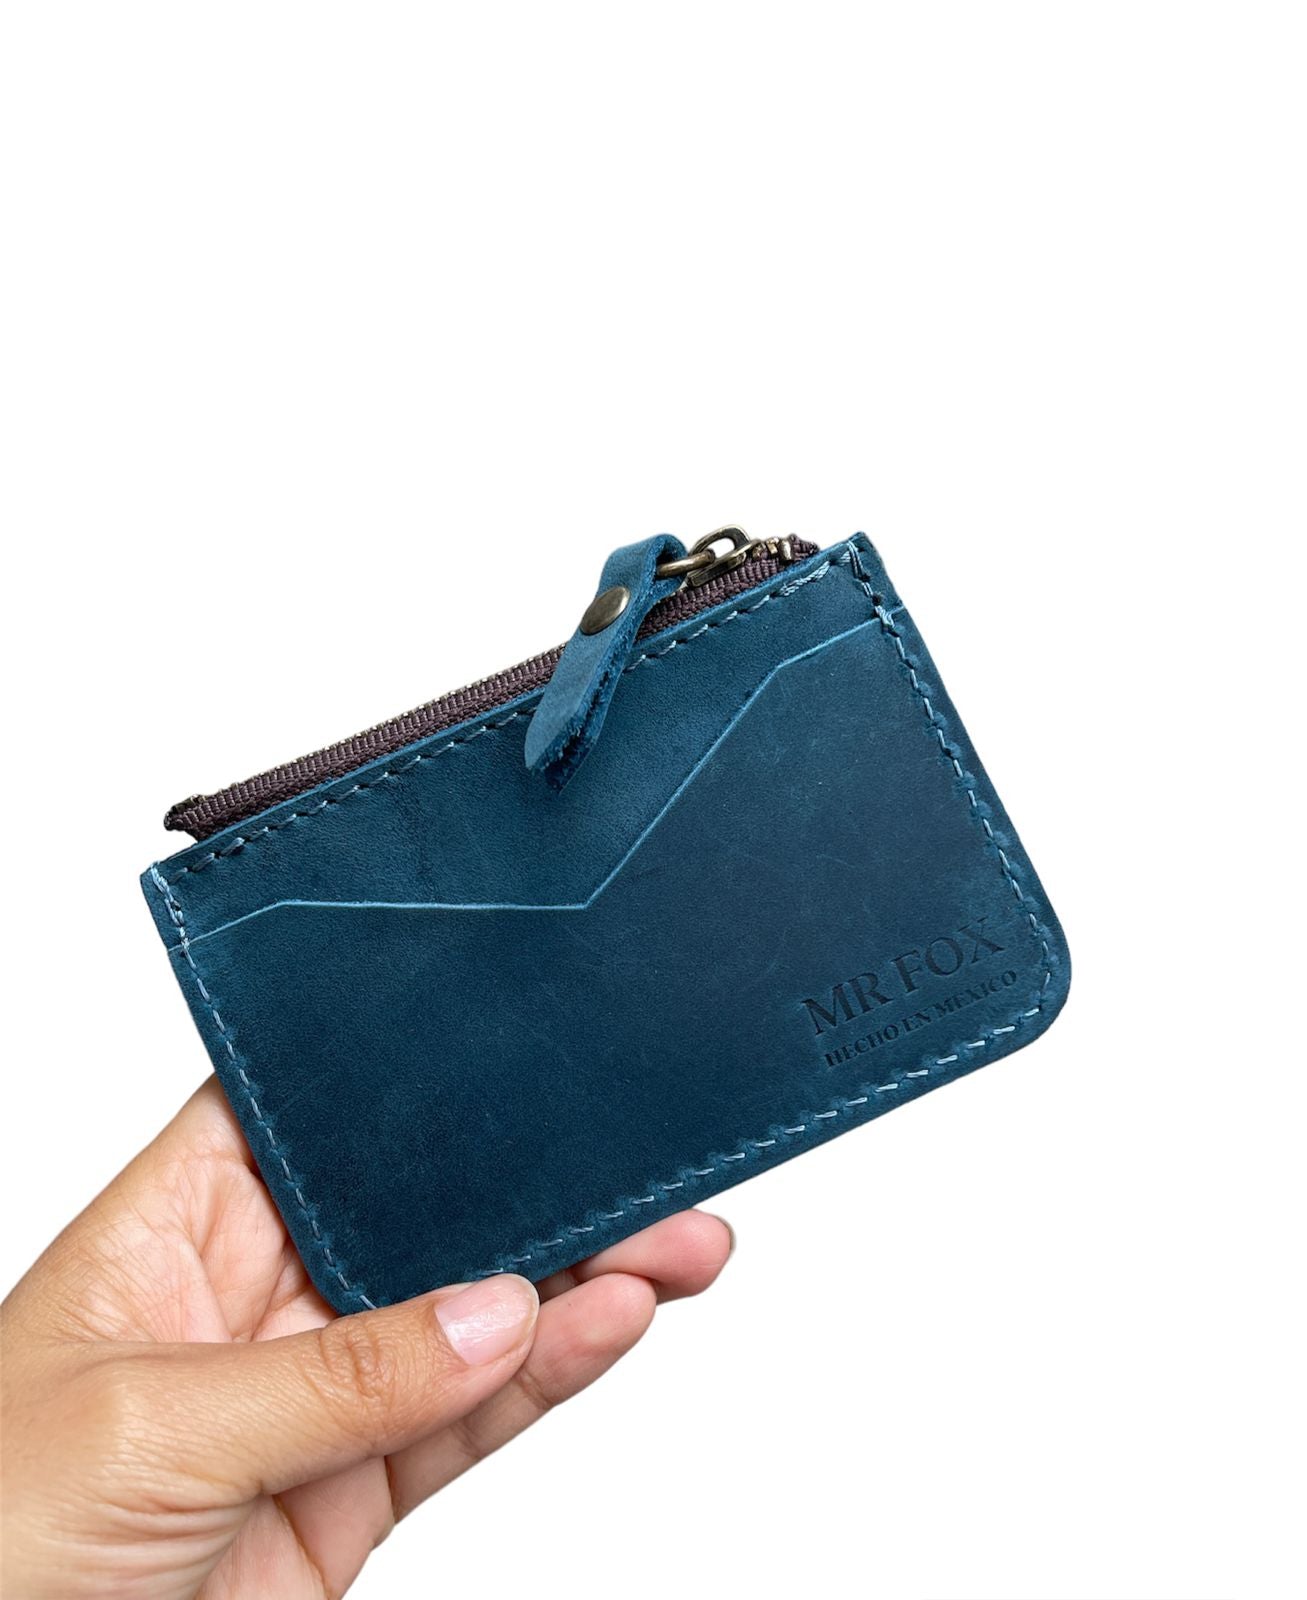 Luxury coin and card holder in leather |Camille Fournet